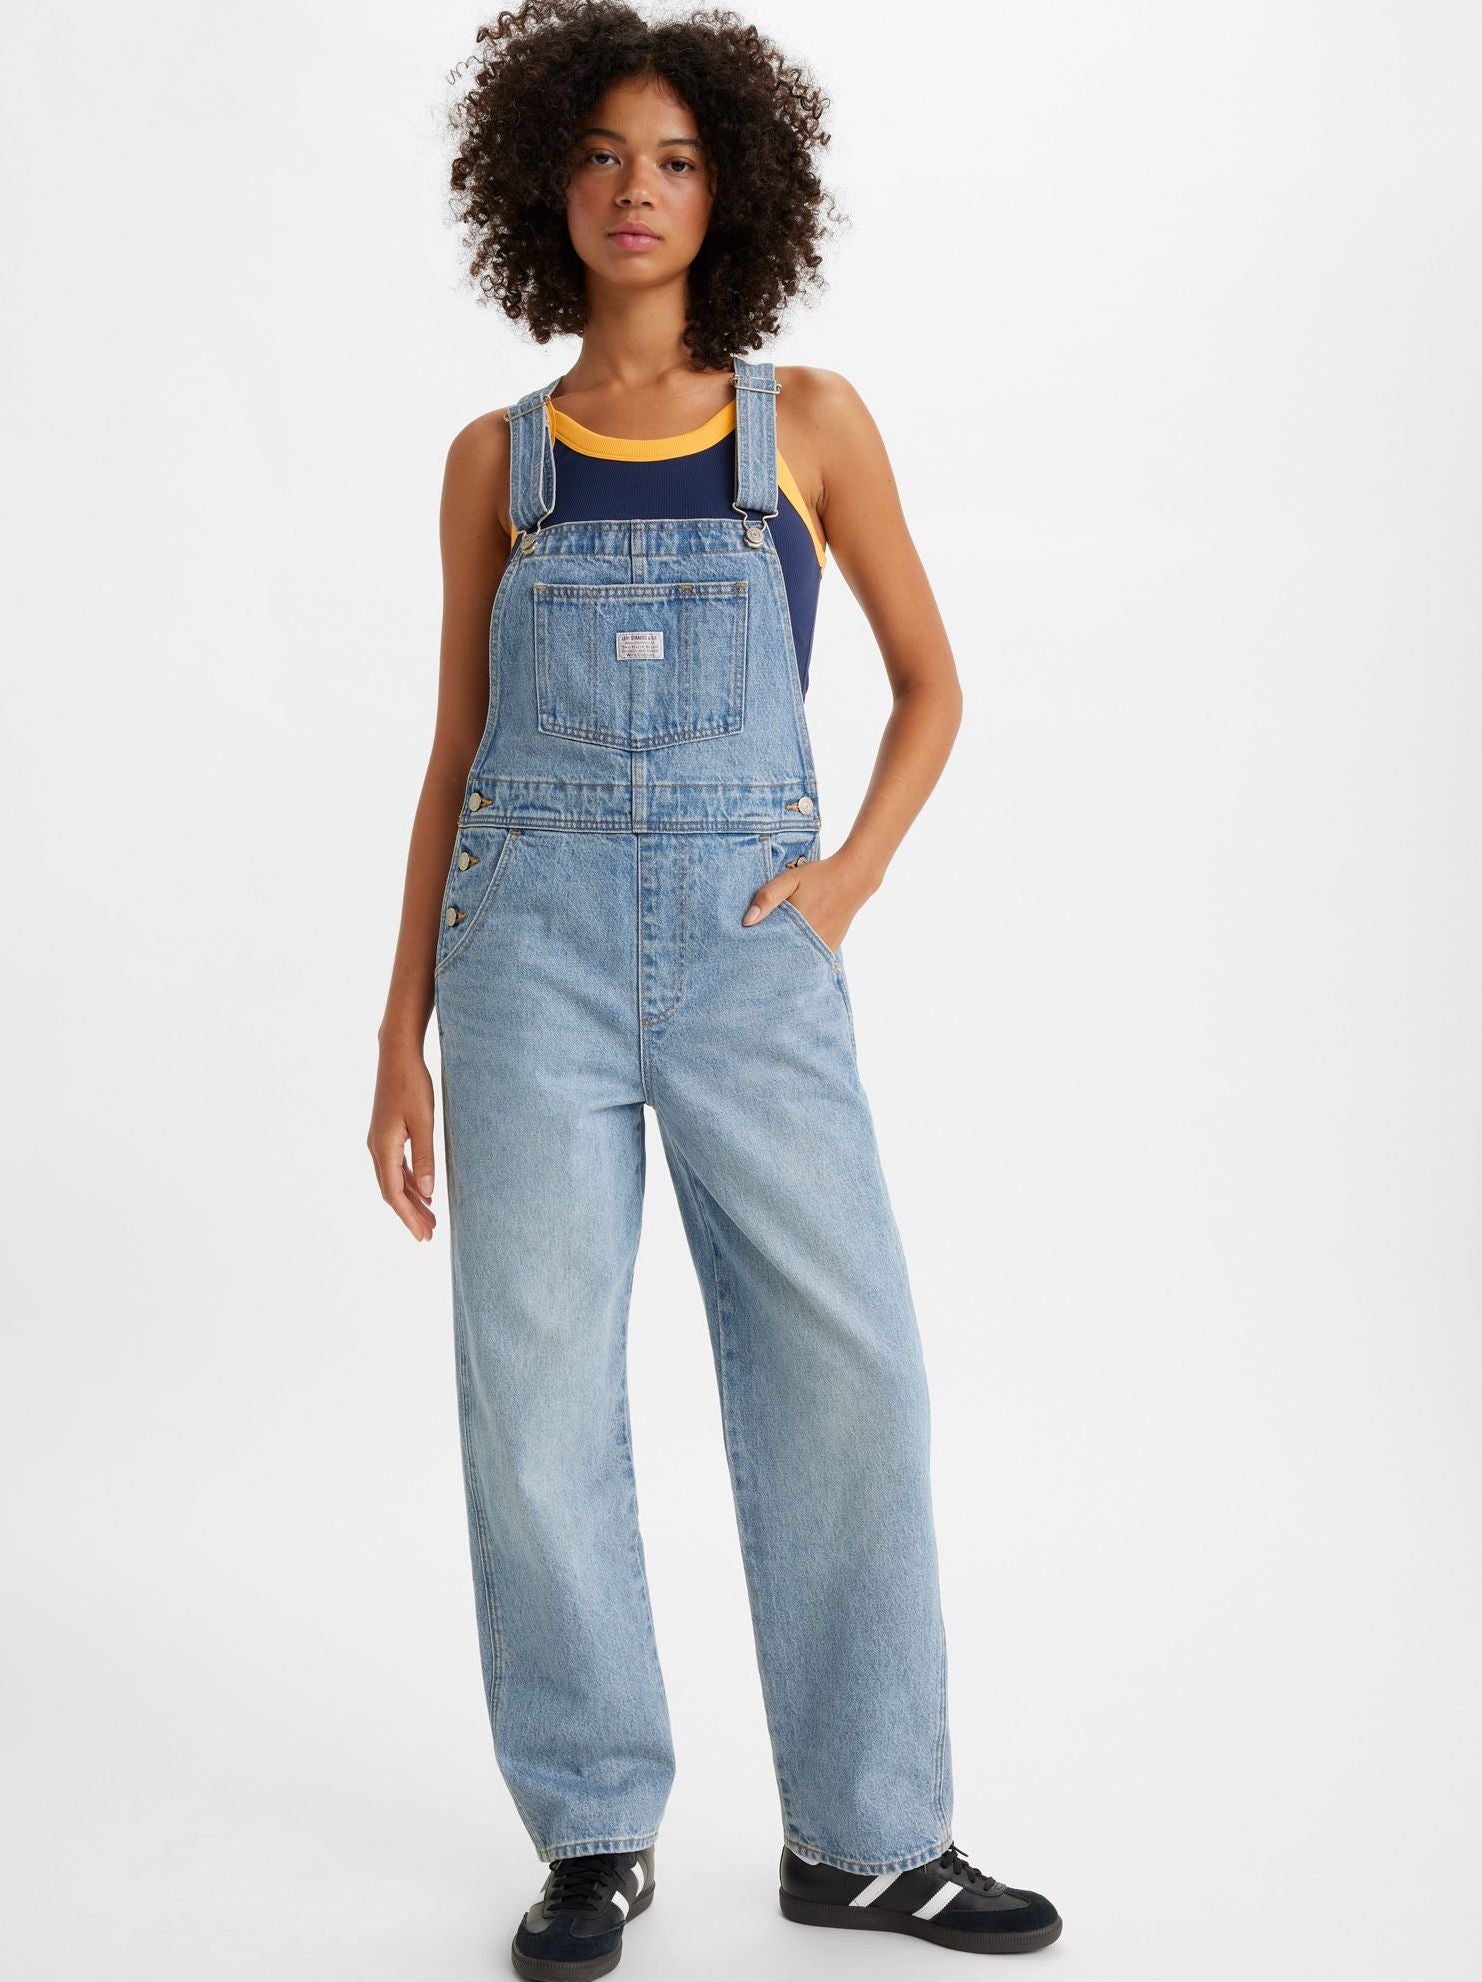 LEVI'S Vintage Overall dungarees 85315-0016 price online